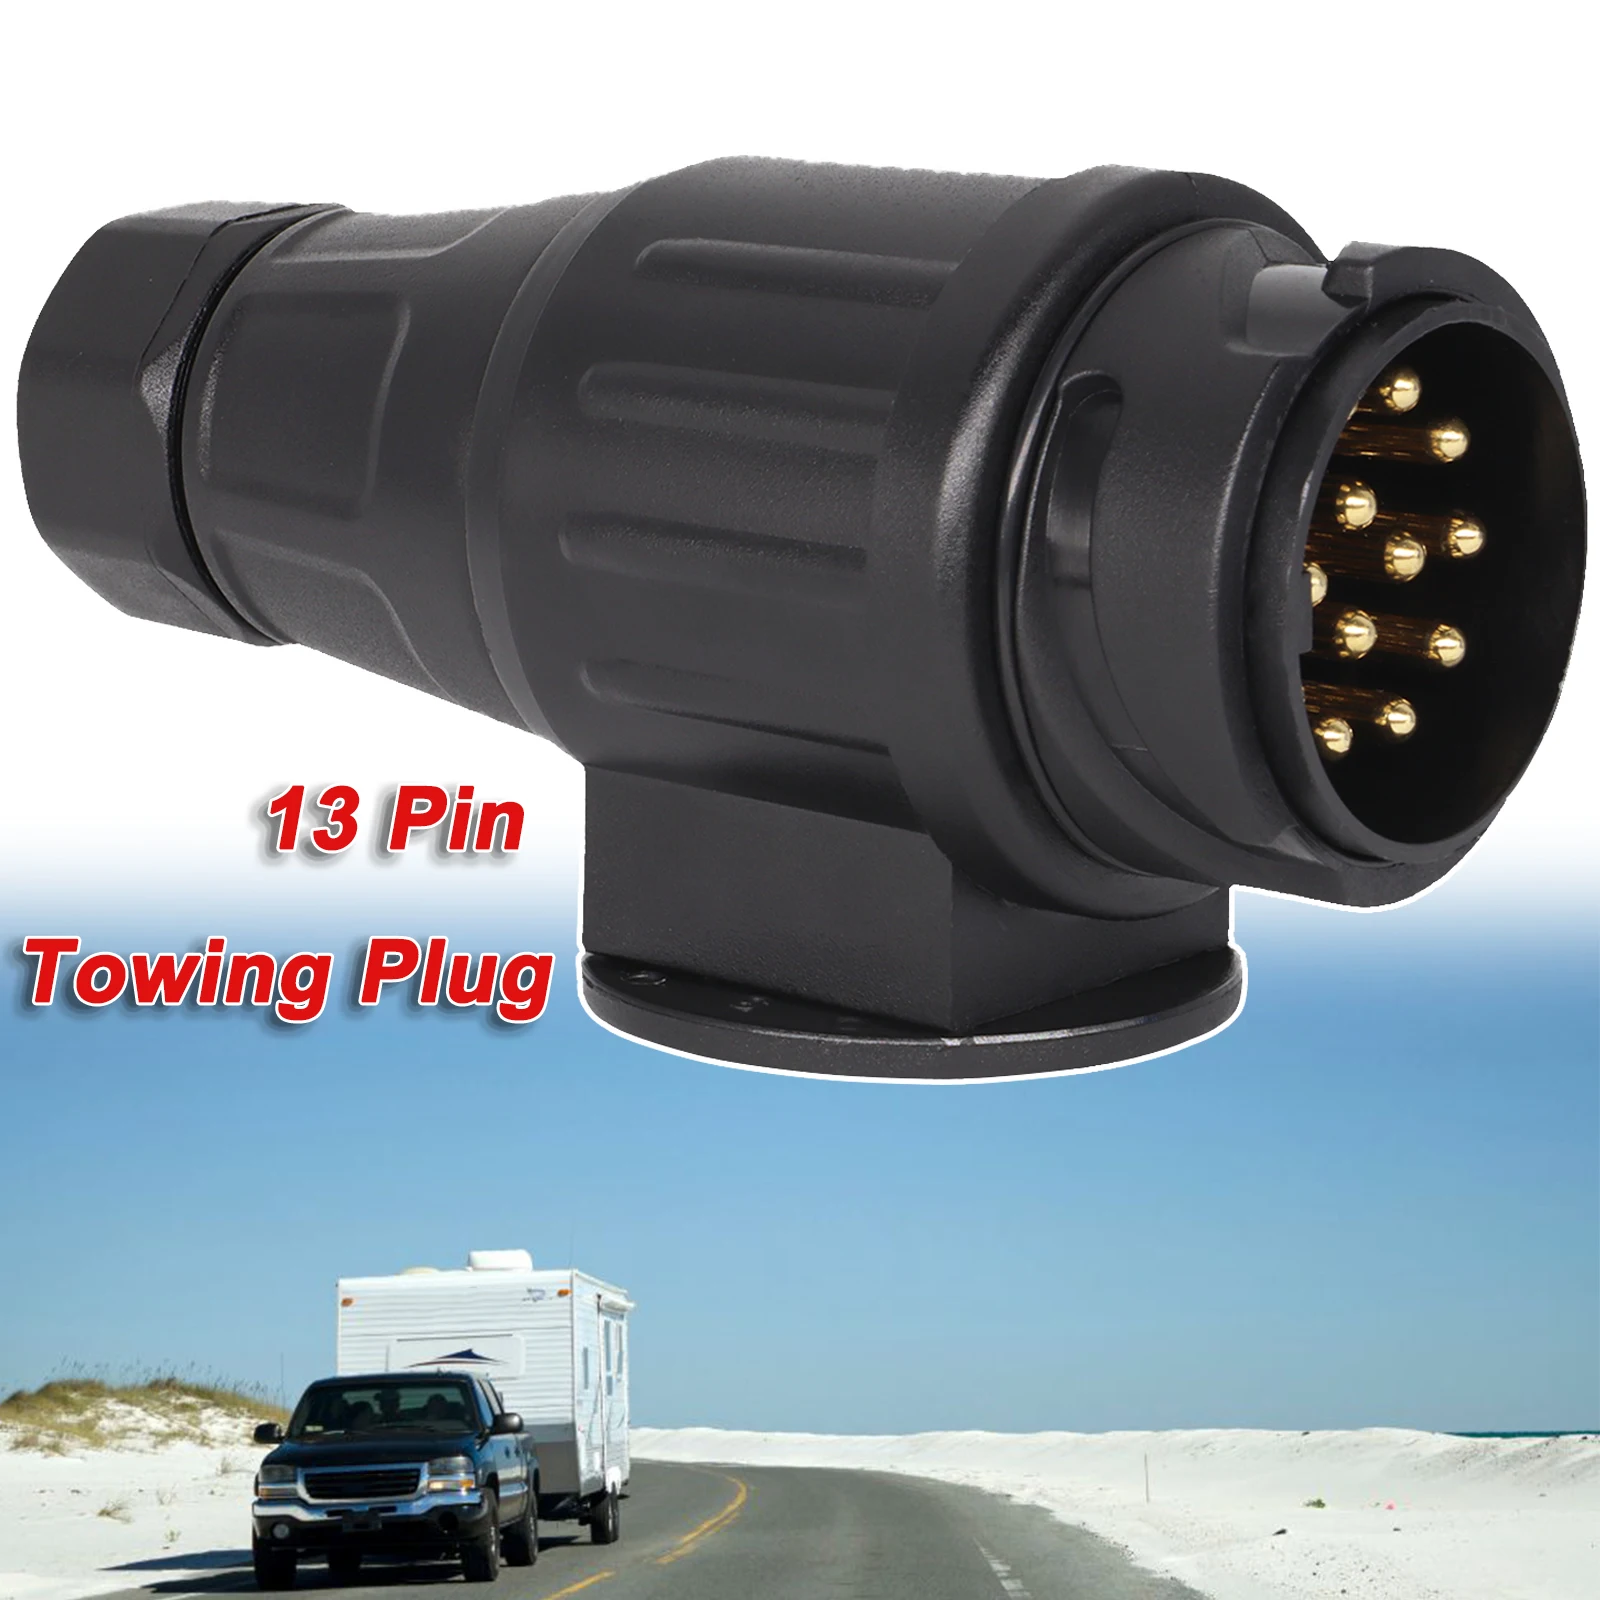 12V 13 Pin Trailer Plug Durable 13 Pole Electrical Caravan Wiring Connector Towing Bar Socket Adapter Car Truck RV Accessories